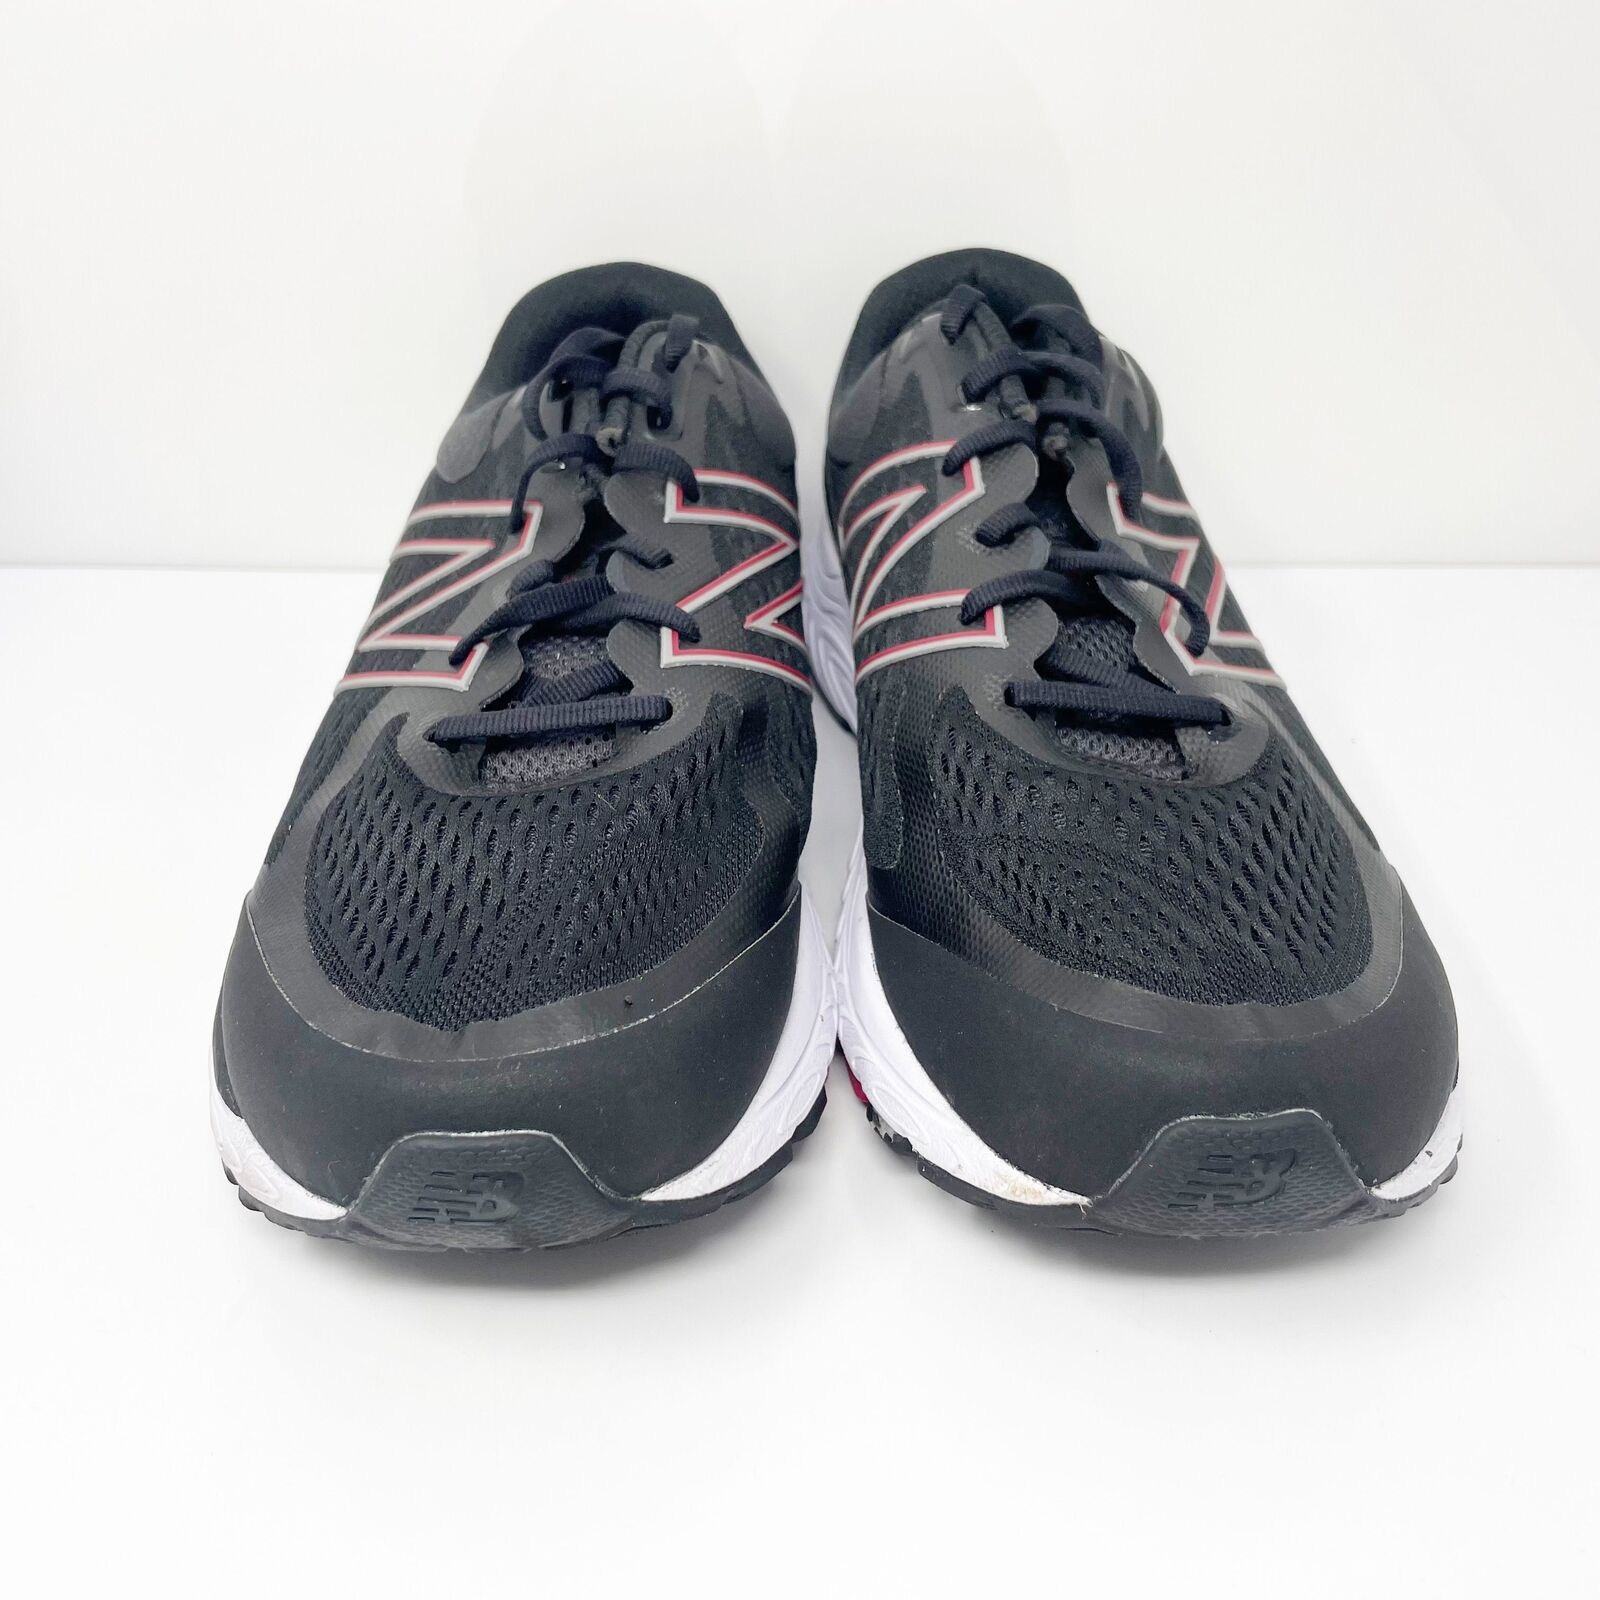 New Balance Mens 840 V5 M840BR5 Black Running Shoes Sneakers Size 9 4E ...